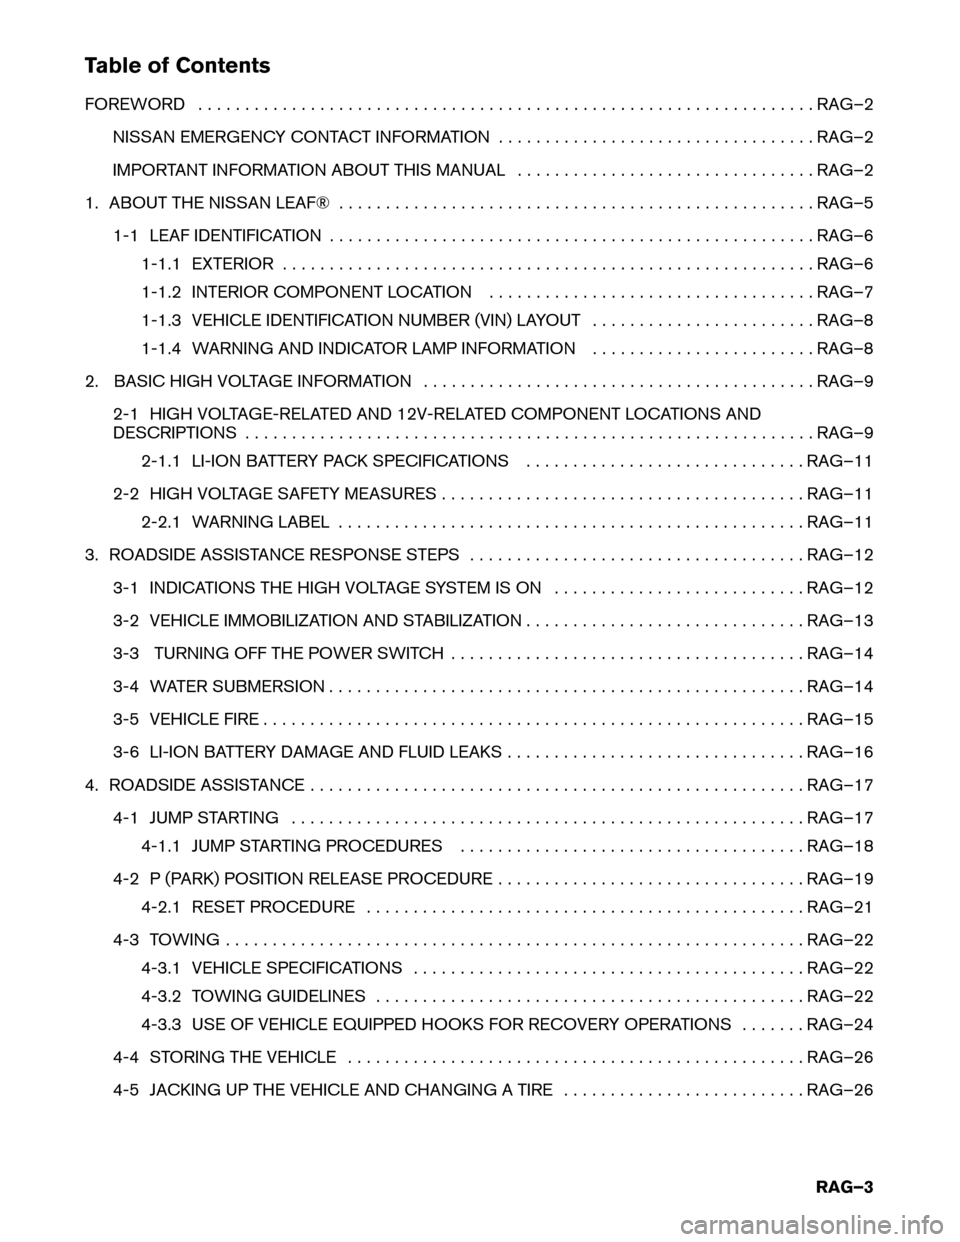 NISSAN LEAF 2015 1.G Roadside Assistance Guide Table of Contents
FOREWORD
. . . . . . . . . . . . . . . . . . . . . . . . . . . . . . . . . . . . . . . . . . . . . . . . . . . . . . . . . . . . . . . . . . RAG–2
NISSAN EMERGENCY CONTACT INFORMAT